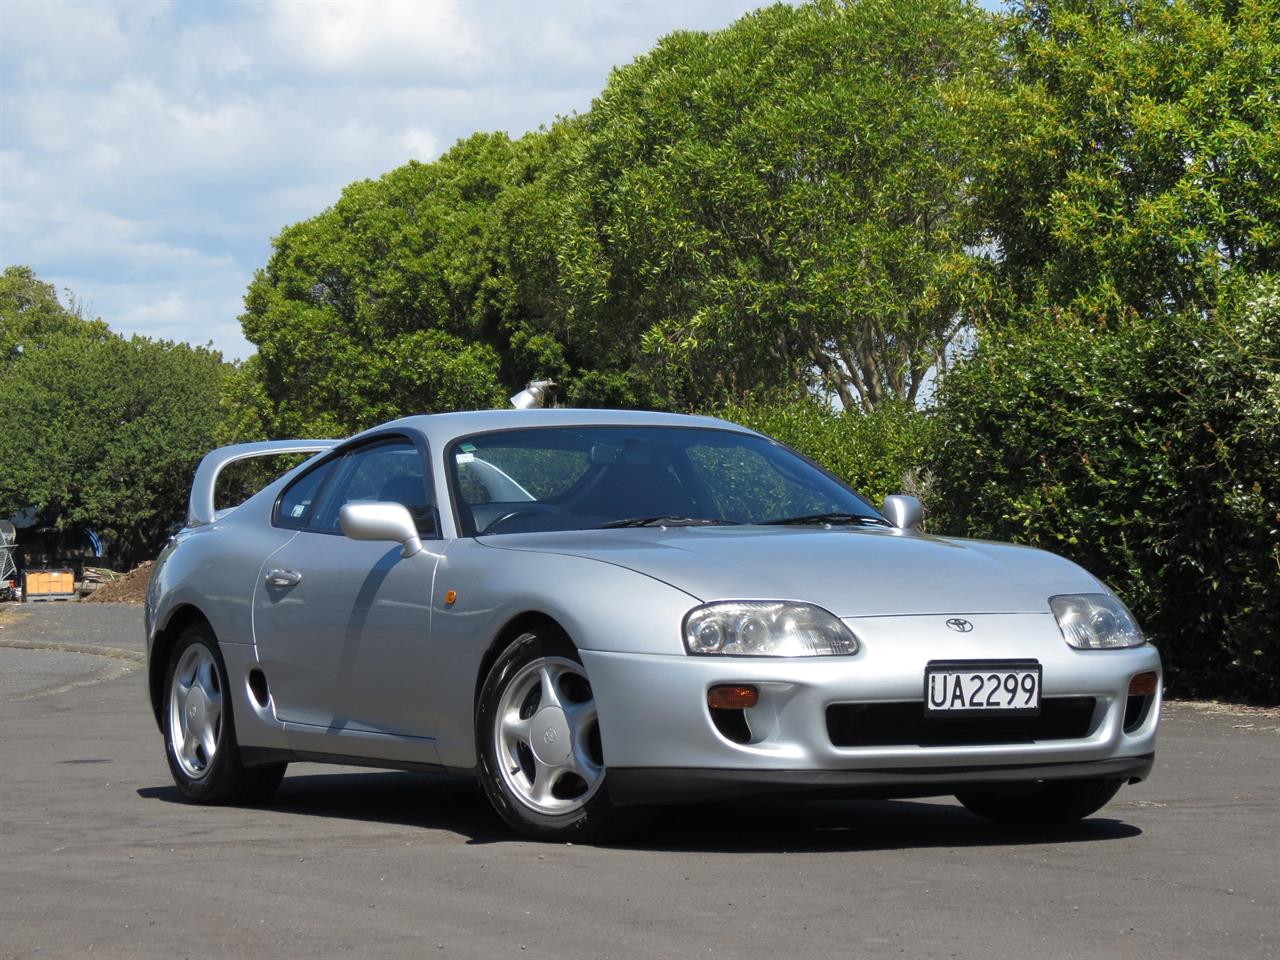 NZC 1994 Toyota SUPRA just arrived to Auckland